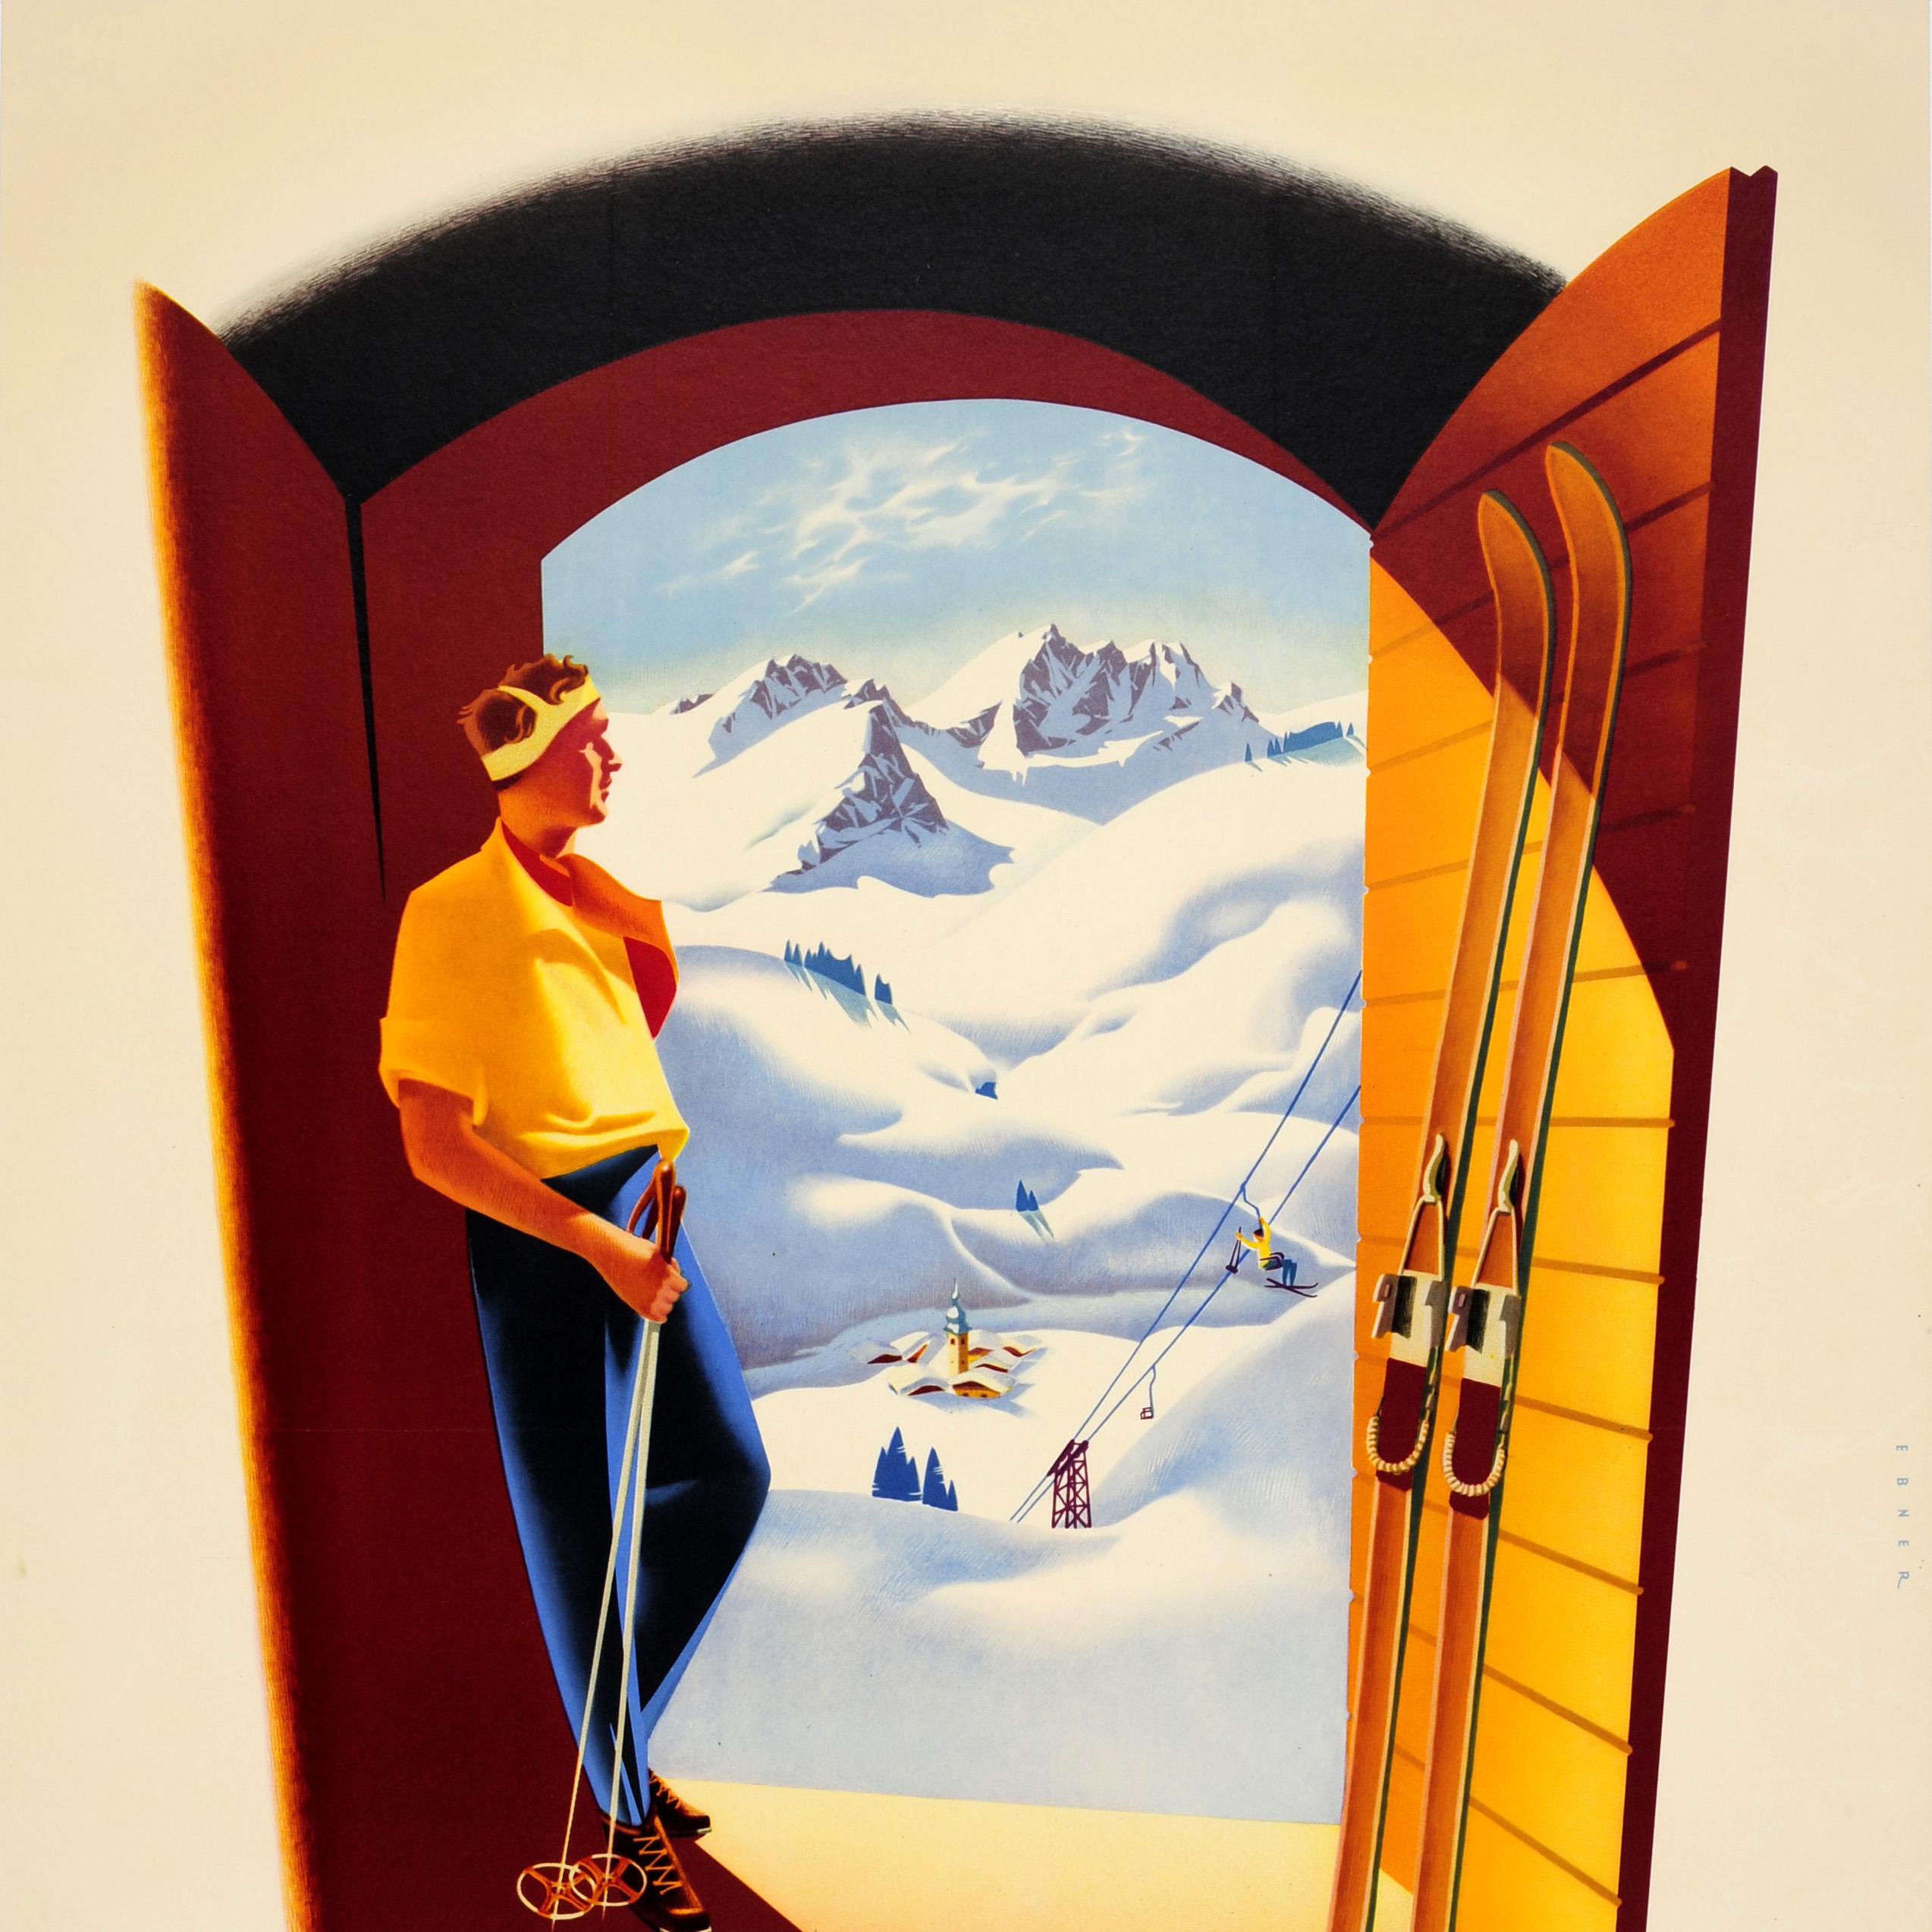 Original vintage travel and winter sports poster for Austria / Osterreich featuring a great image of a skier leaning against a doorway holding his ski poles with his skis against the door, looking out at the snowy slopes and a ski lift with mountain